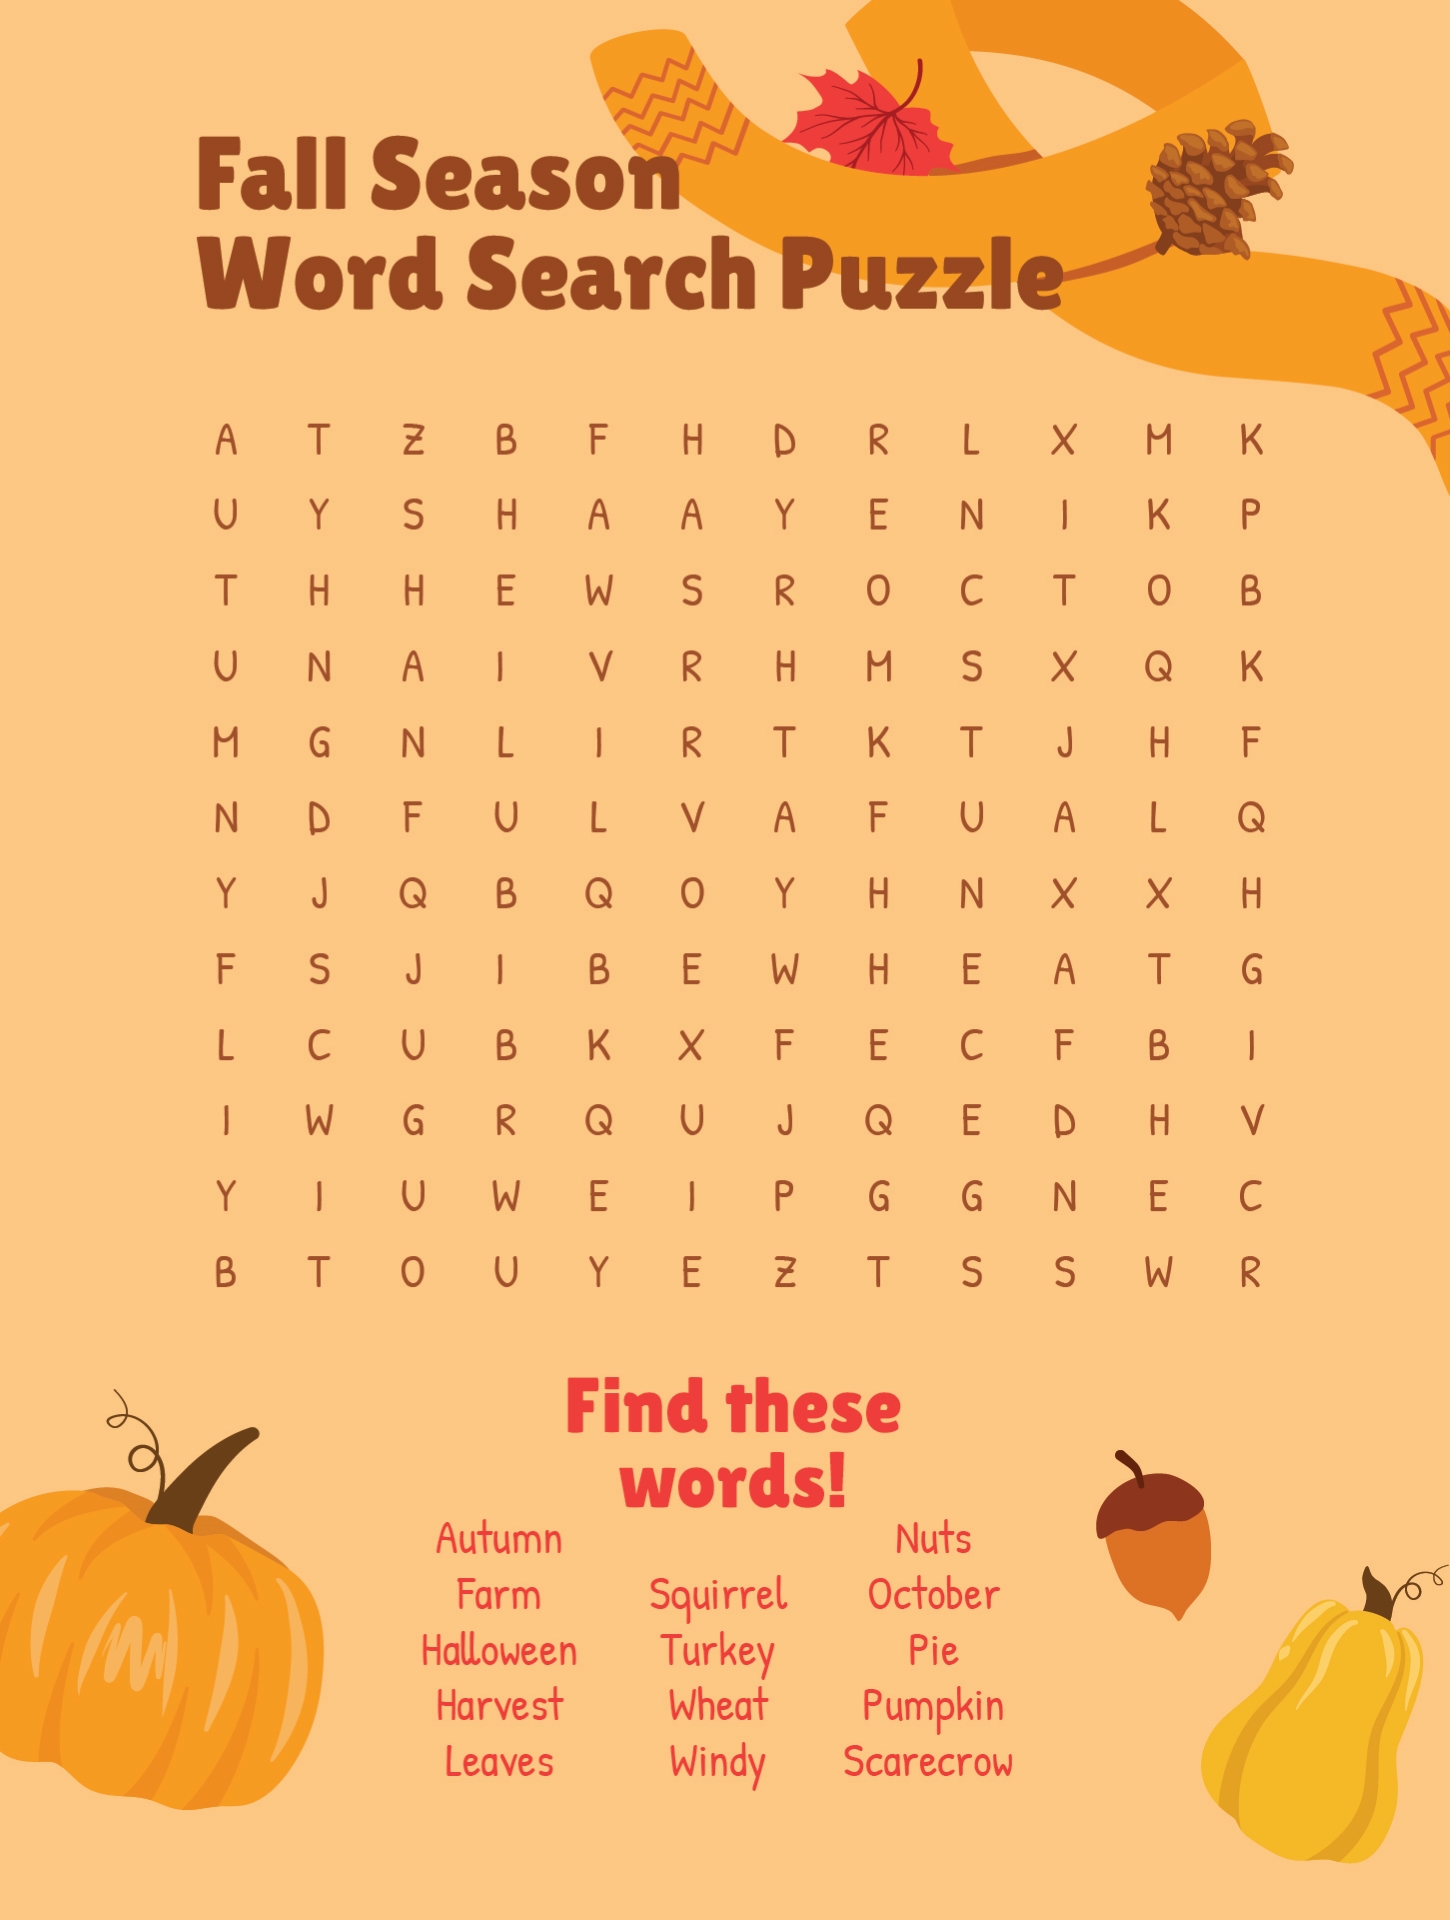 5 Best Images of Fall Word Search Printable - Fall Word Search Puzzles ...